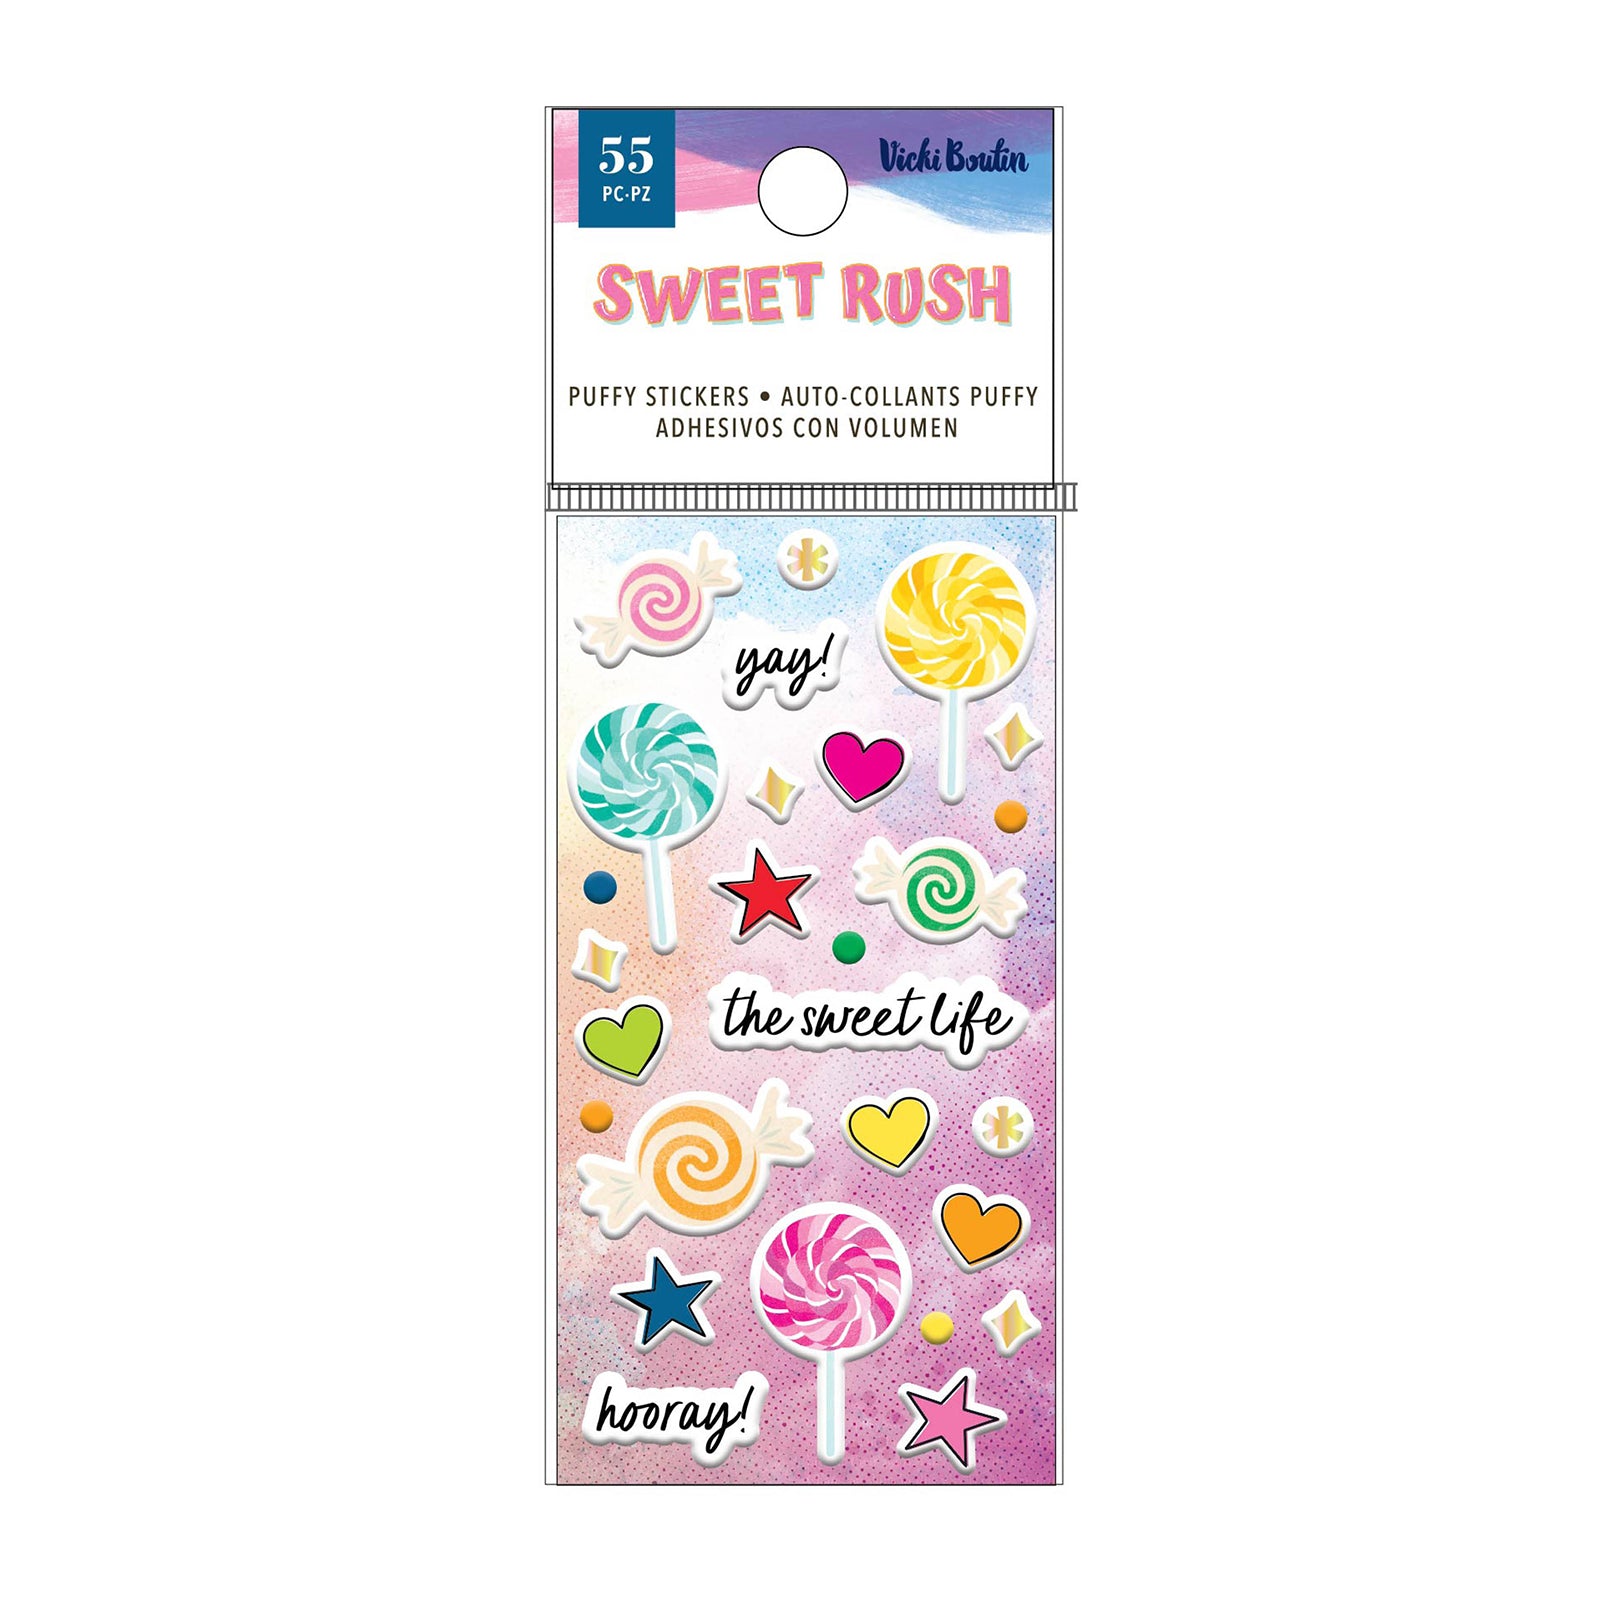 SWEET RUSH Puffy Stickers- PRE-ORDER